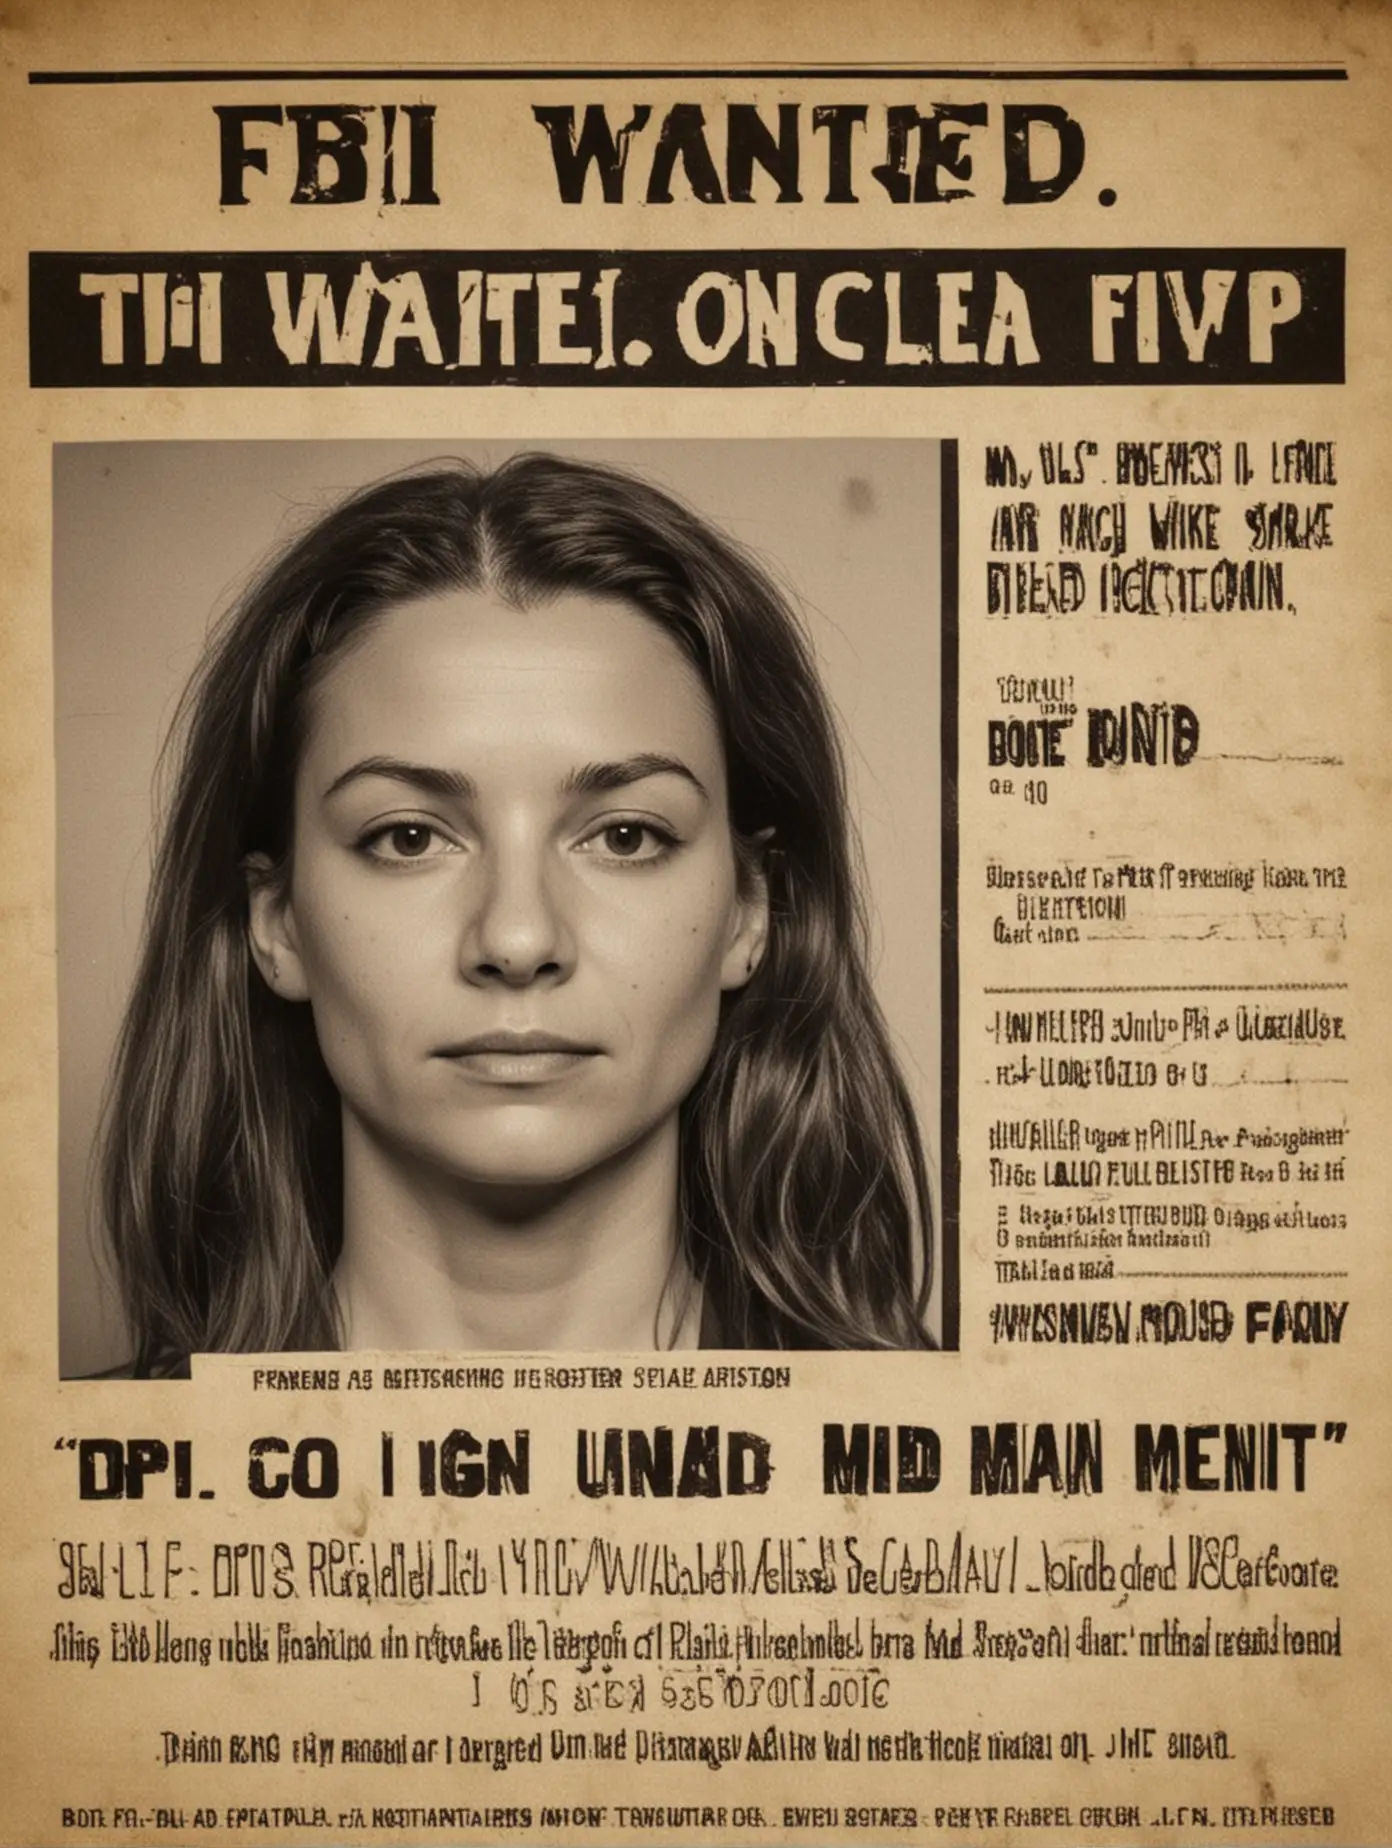 FBI Wanted Poster Featuring Womans Mugshot